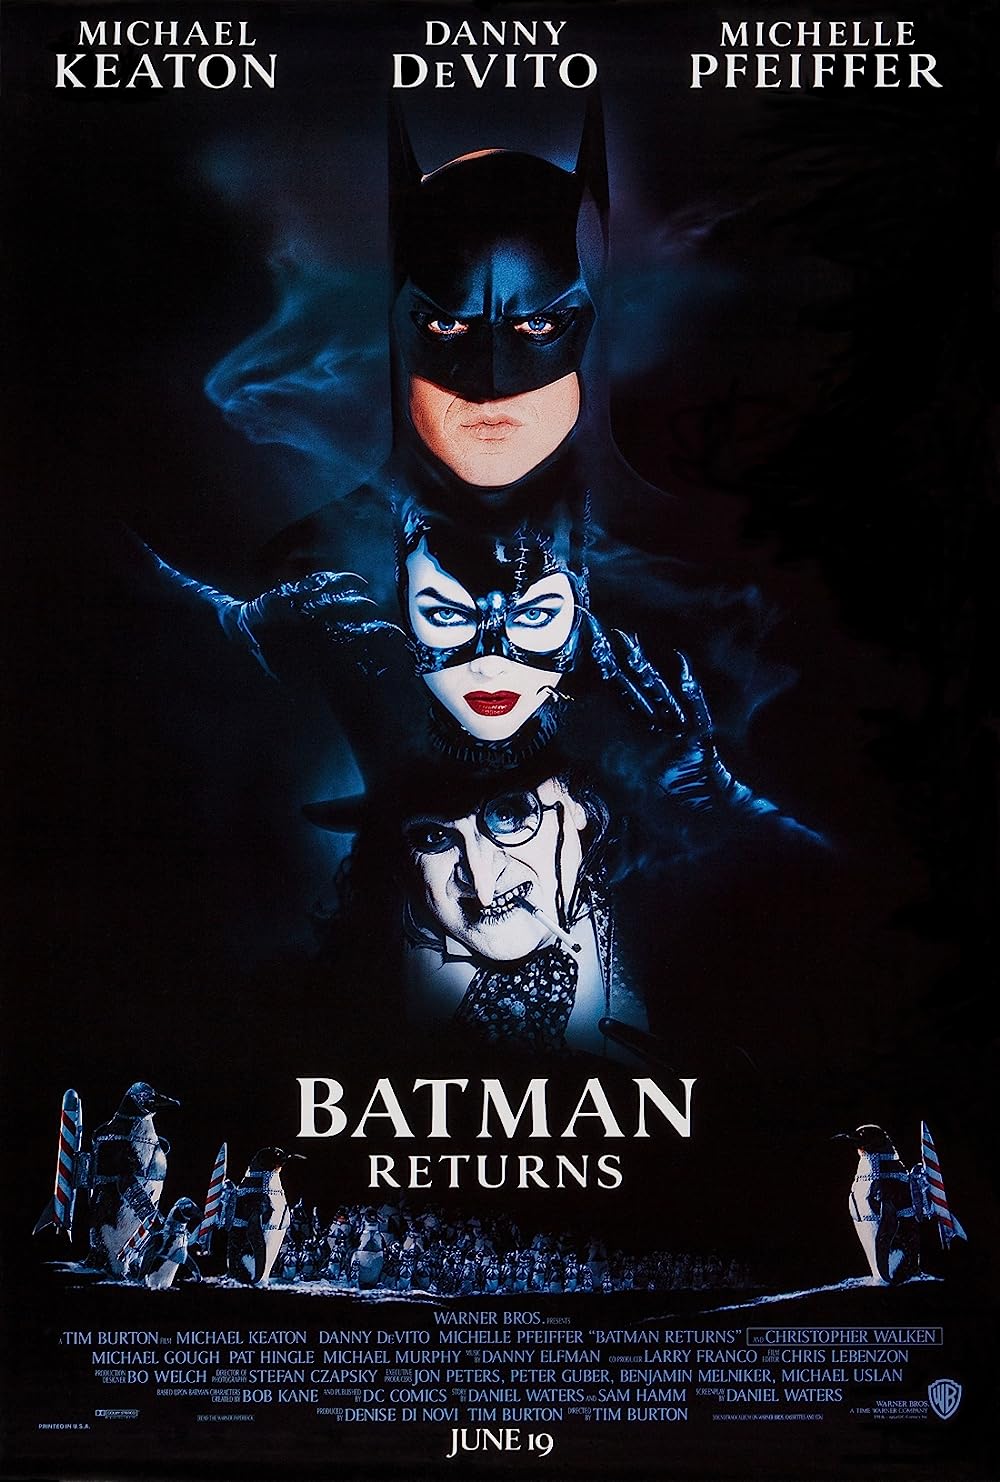 Batman Returns: Tim Burton's darker take on the holidays showcases the nightmare beauty of Christmas, albeit not a traditional holiday movie. With a classic Burton touch, it's worth revisiting during the festive season.